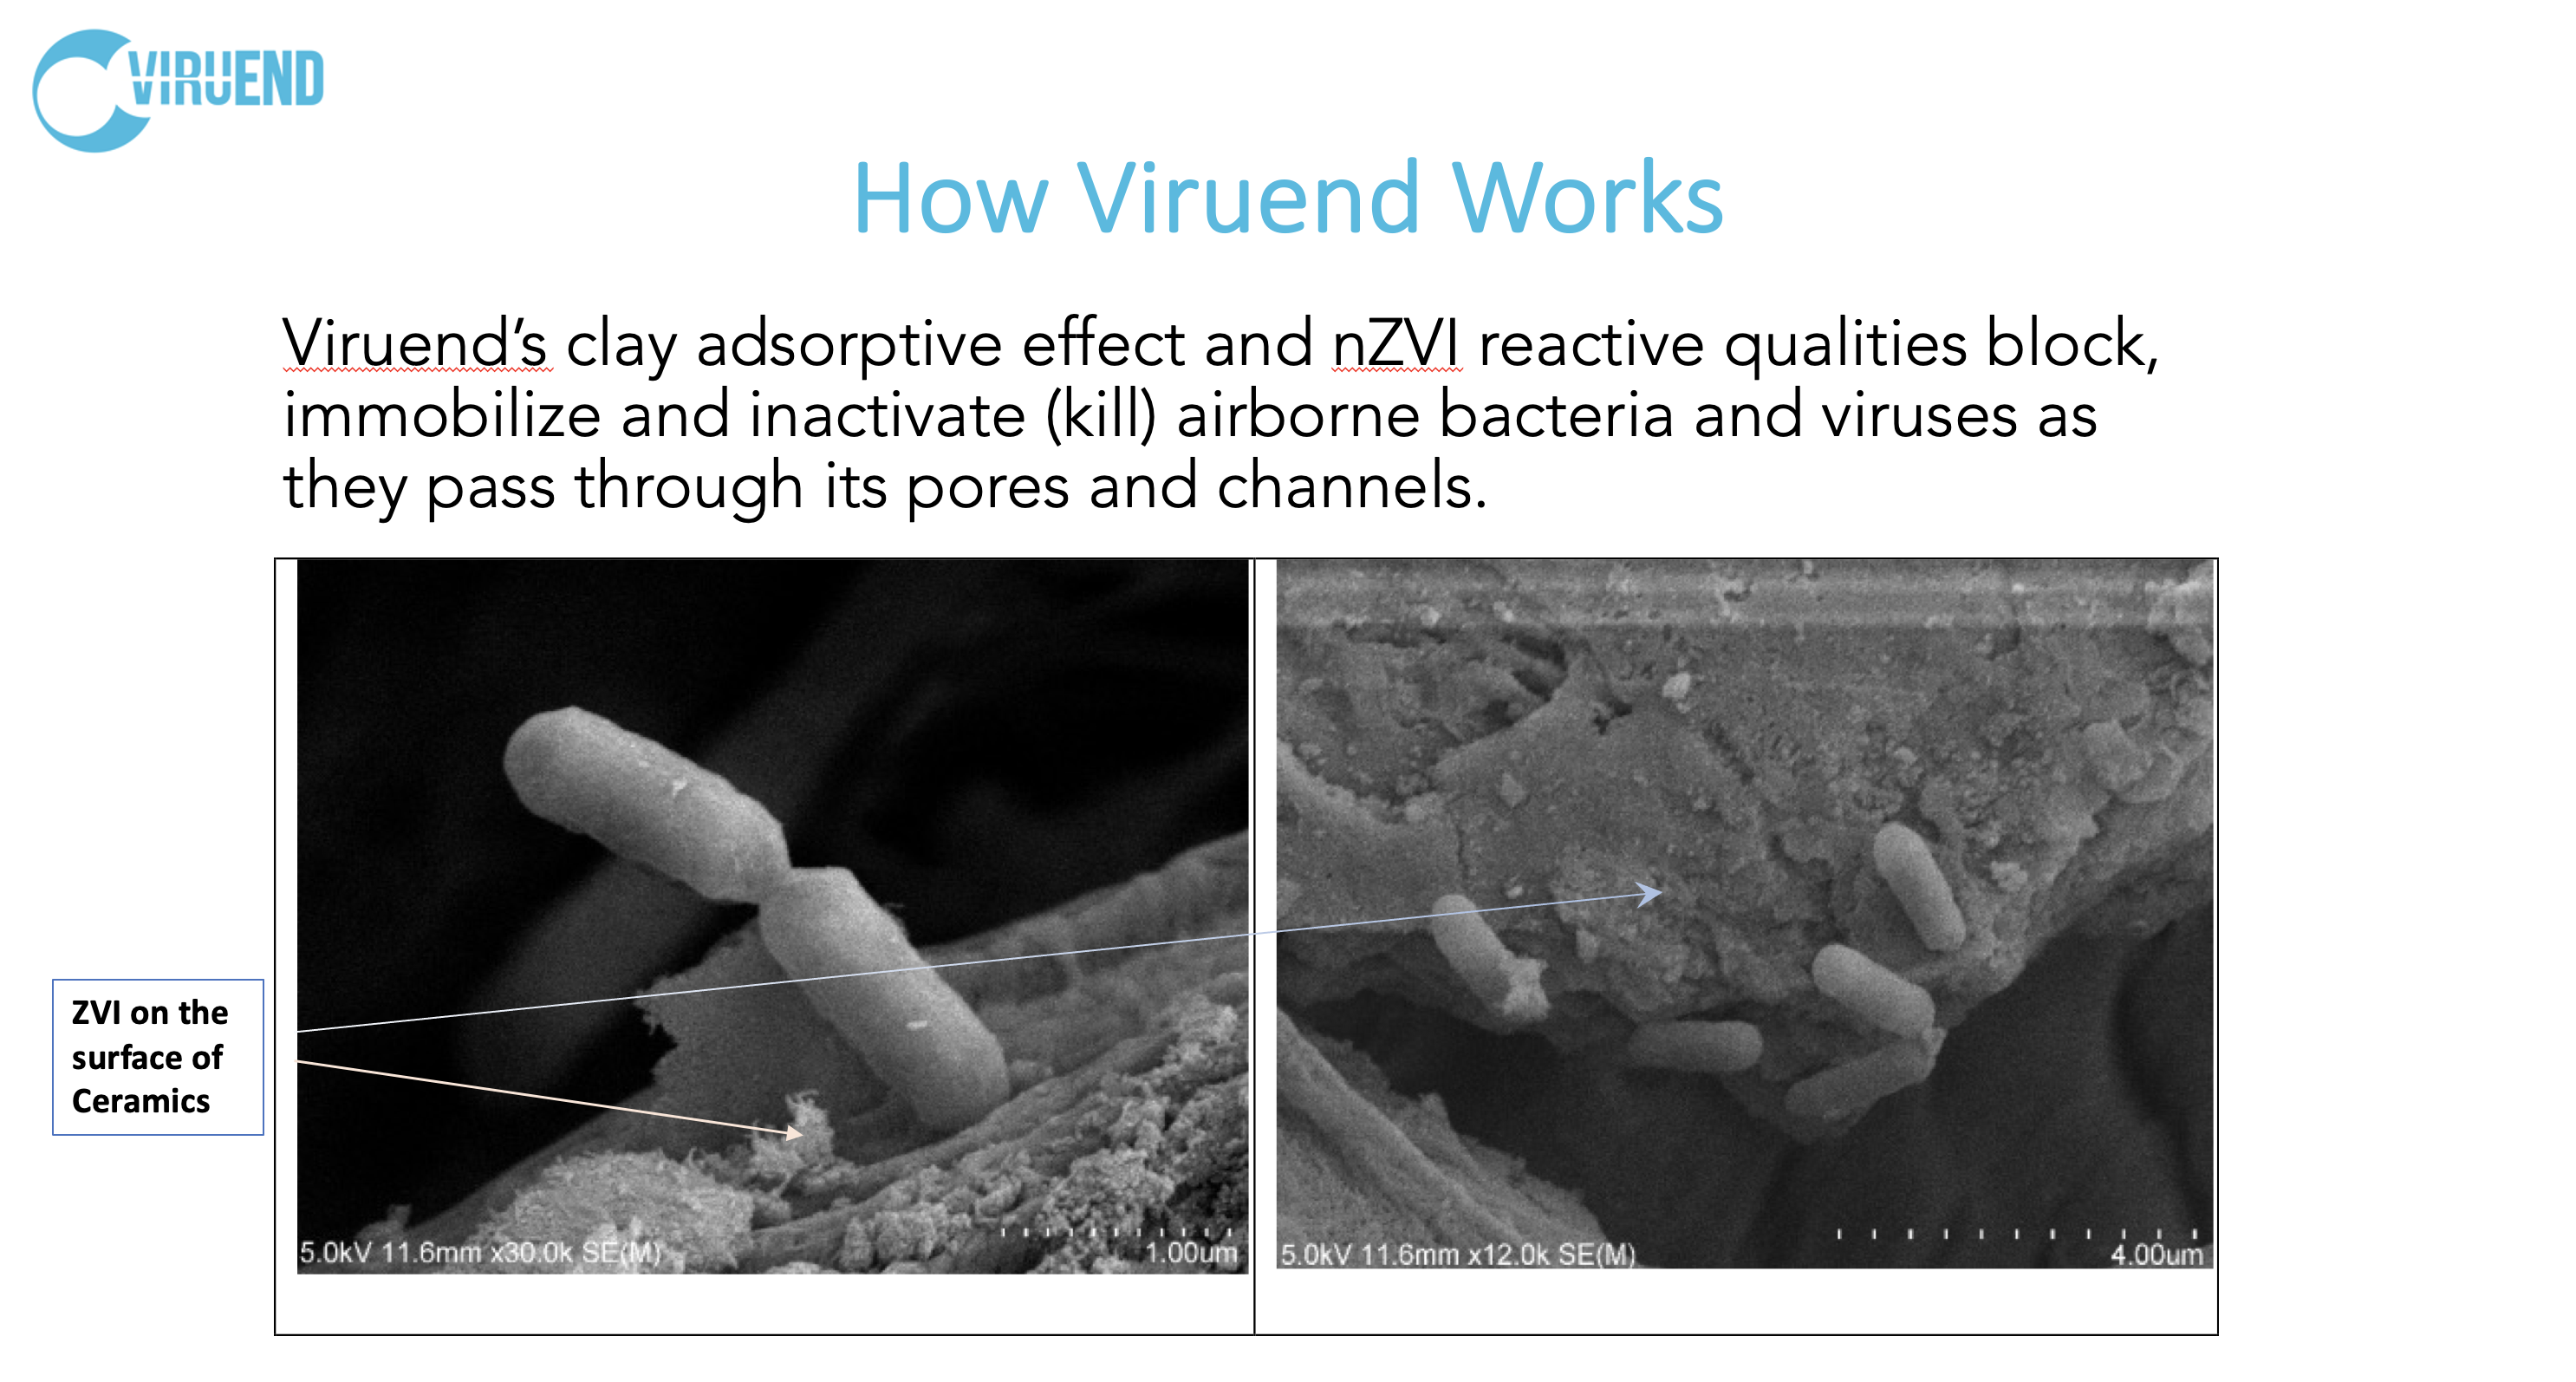 Viruend’s clay adsorptive effect and nZVI reactive qualities block, immobilize and inactivate (kill) airborne bacteria and viruses as they pass through its pores and channels.